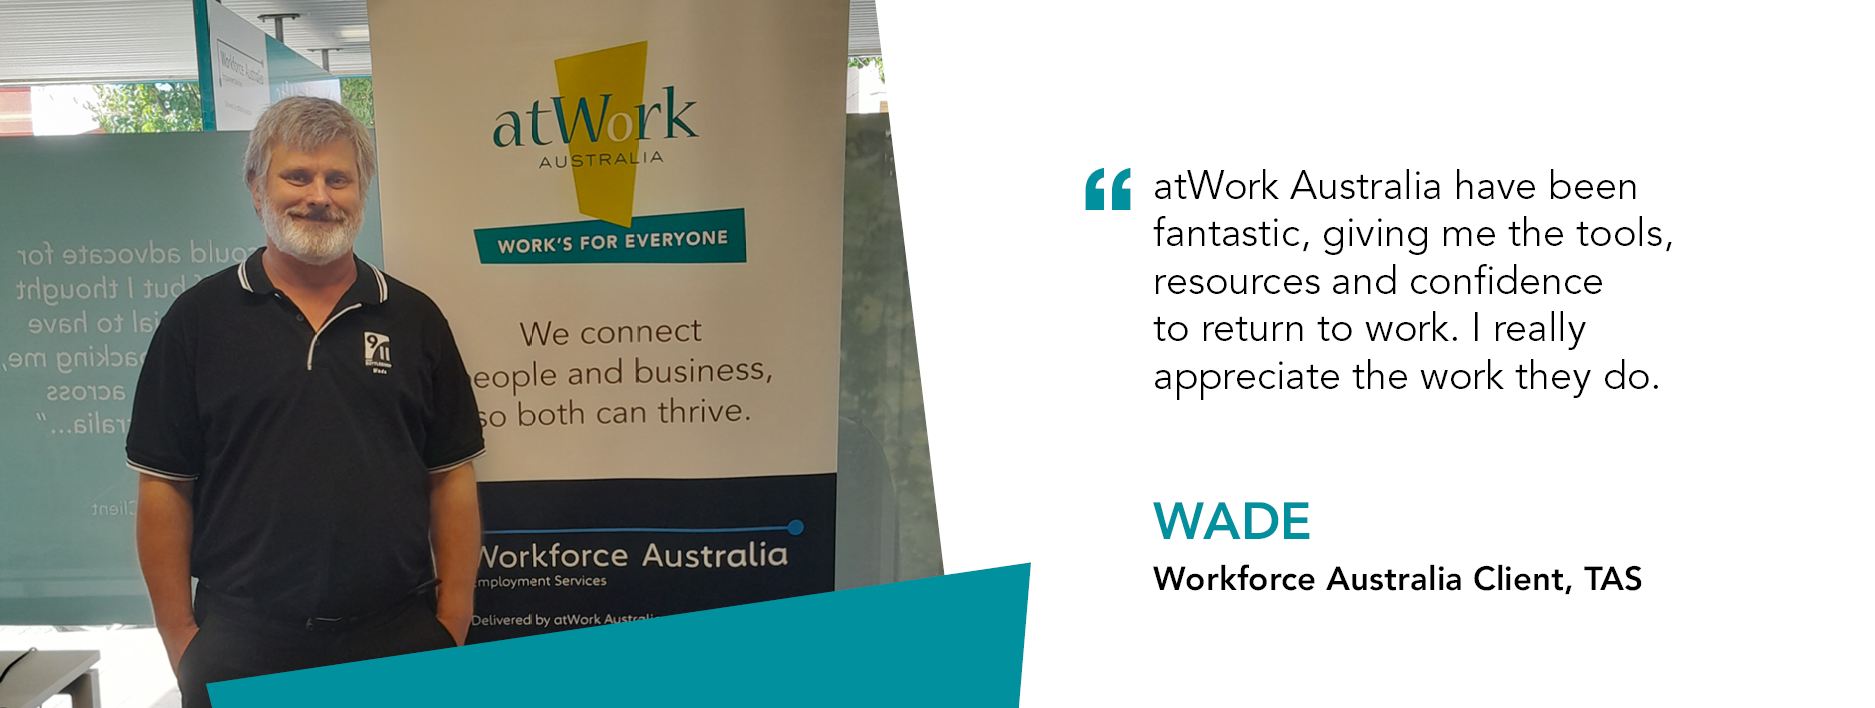 Quote reads "atWork Australia have been fantastic, giving me the tools, resources and confidence to return to work. I really appreciate the work they do." said client Wade from Workforce Australia Tasmania